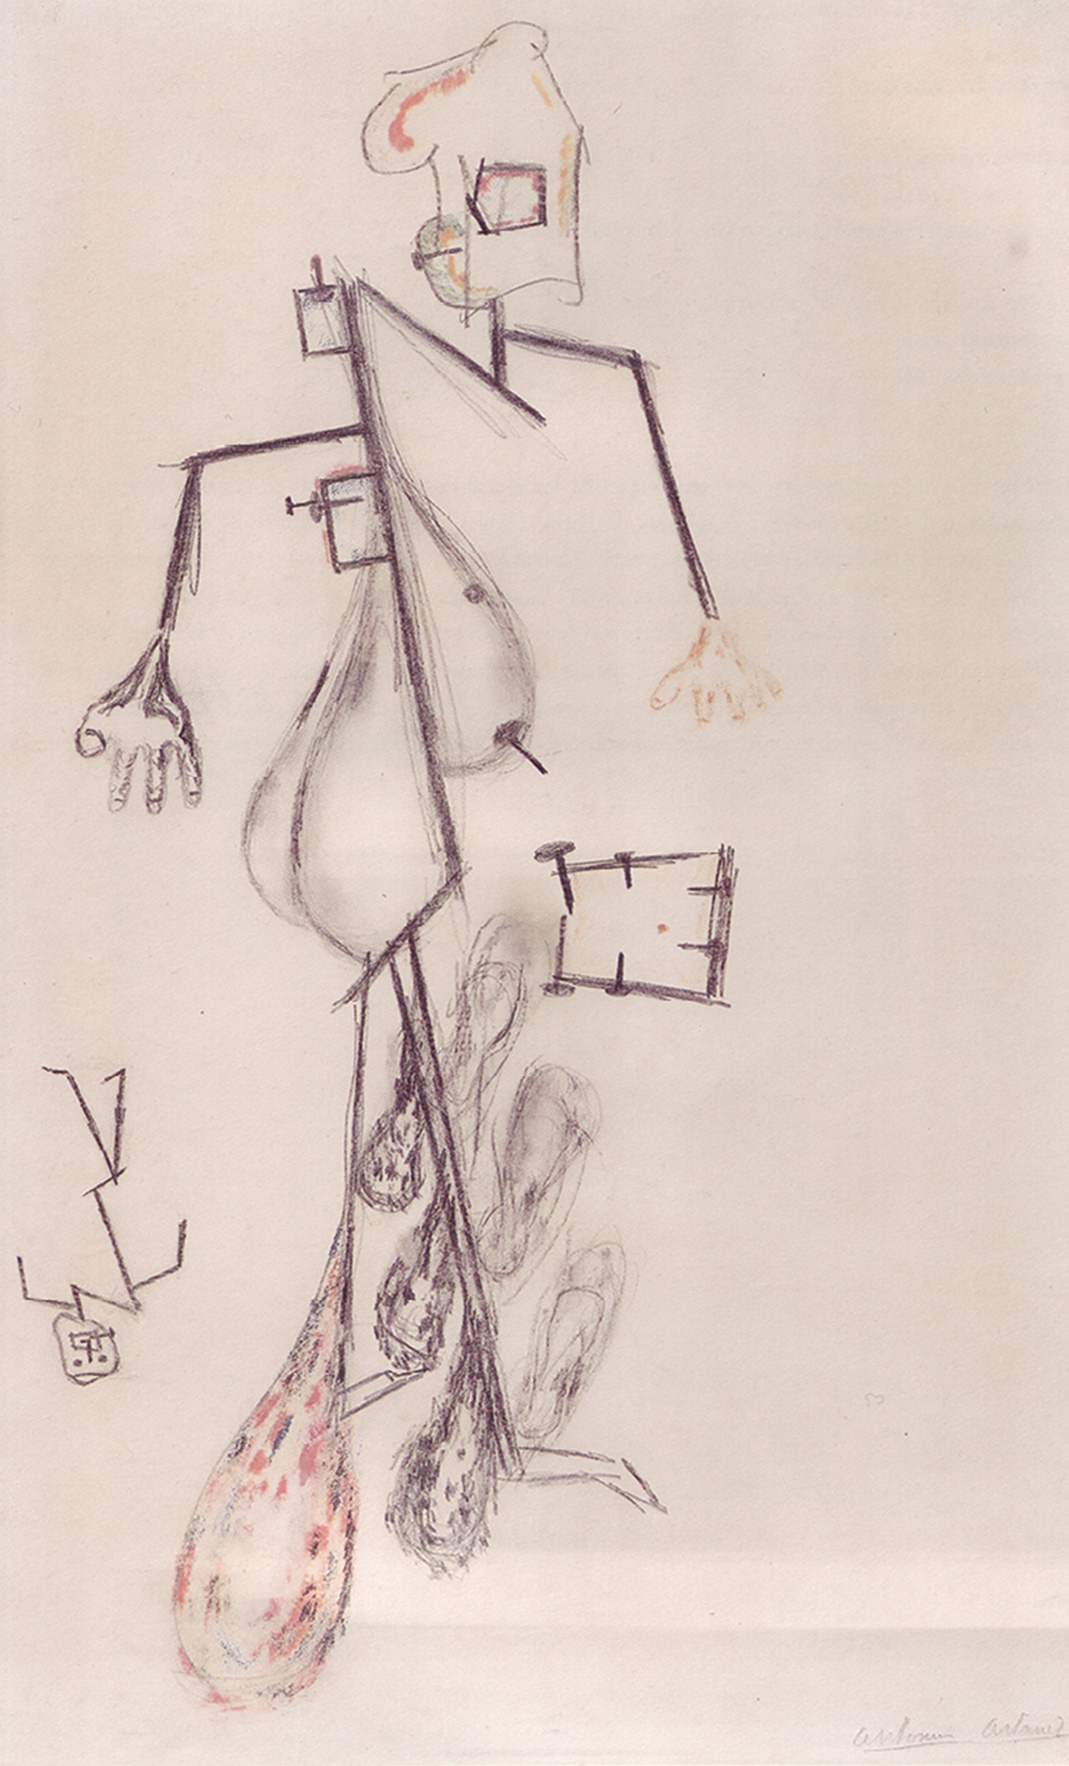 Antonin Artaud’s drawing titled “L’homme et sa douleur,” April nineteen forty six.
 “No mouth / no tongue / no teeth / no larynx / no esophagus / no stomach / no intestine / no anus.” The poet and theater director Antonin Artaud wrote these words in nineteen forty-eight, the year of his death. They famously appear at the beginning of Deleuze and Guattari’s “Anti-Oedipus: Capitalism and Schizophrenia” (Nineteen seventy-two), which adopts Artaud’s idea of “the body without organs” to illustrate their romantic notion of the schizophrenic’s free-flow of desire. In the catalog essay for his recent exhibition “Mélancolie,” the curator and critic Jean Clair has criticized this appropriation of Artaud as a misdiagnosis, and has suggested that Artaud had Cotard’s syndrome. Artaud was first institutionalized in nineteen thirty-seven after suffering a series of violent hallucinations, for which he underwent fifty-one electroshock treatments; he was released in nineteen forty-six. The drawings here, made by Artaud during his last two years under psychiatric care, depict the body in pieces, with missing members and disjointed parts.”